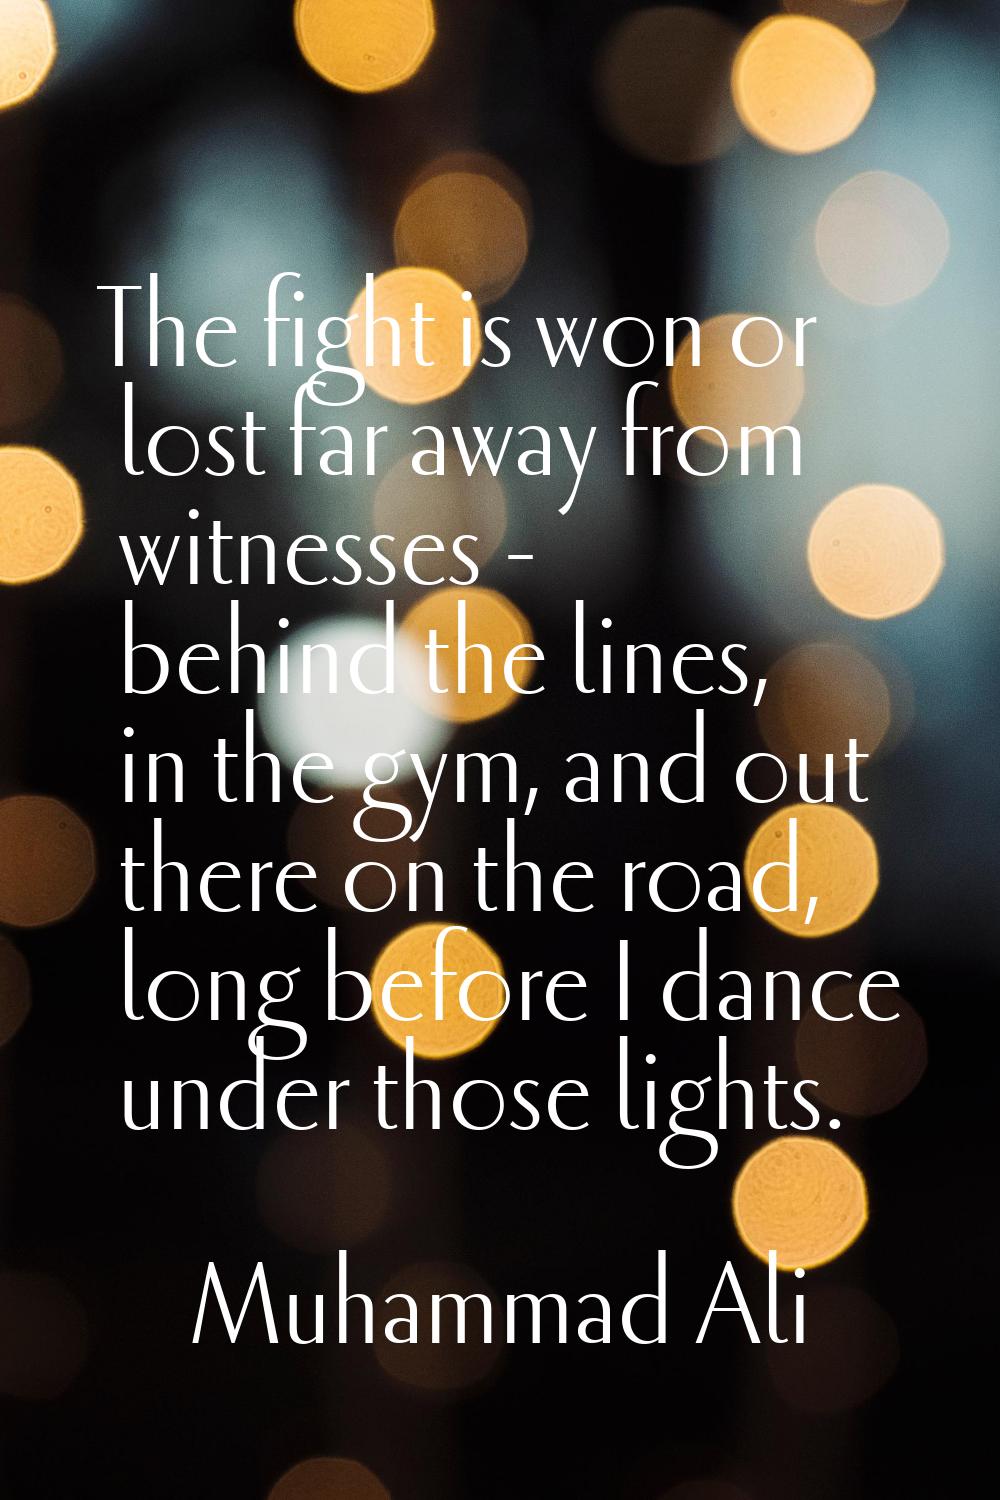 The fight is won or lost far away from witnesses - behind the lines, in the gym, and out there on t